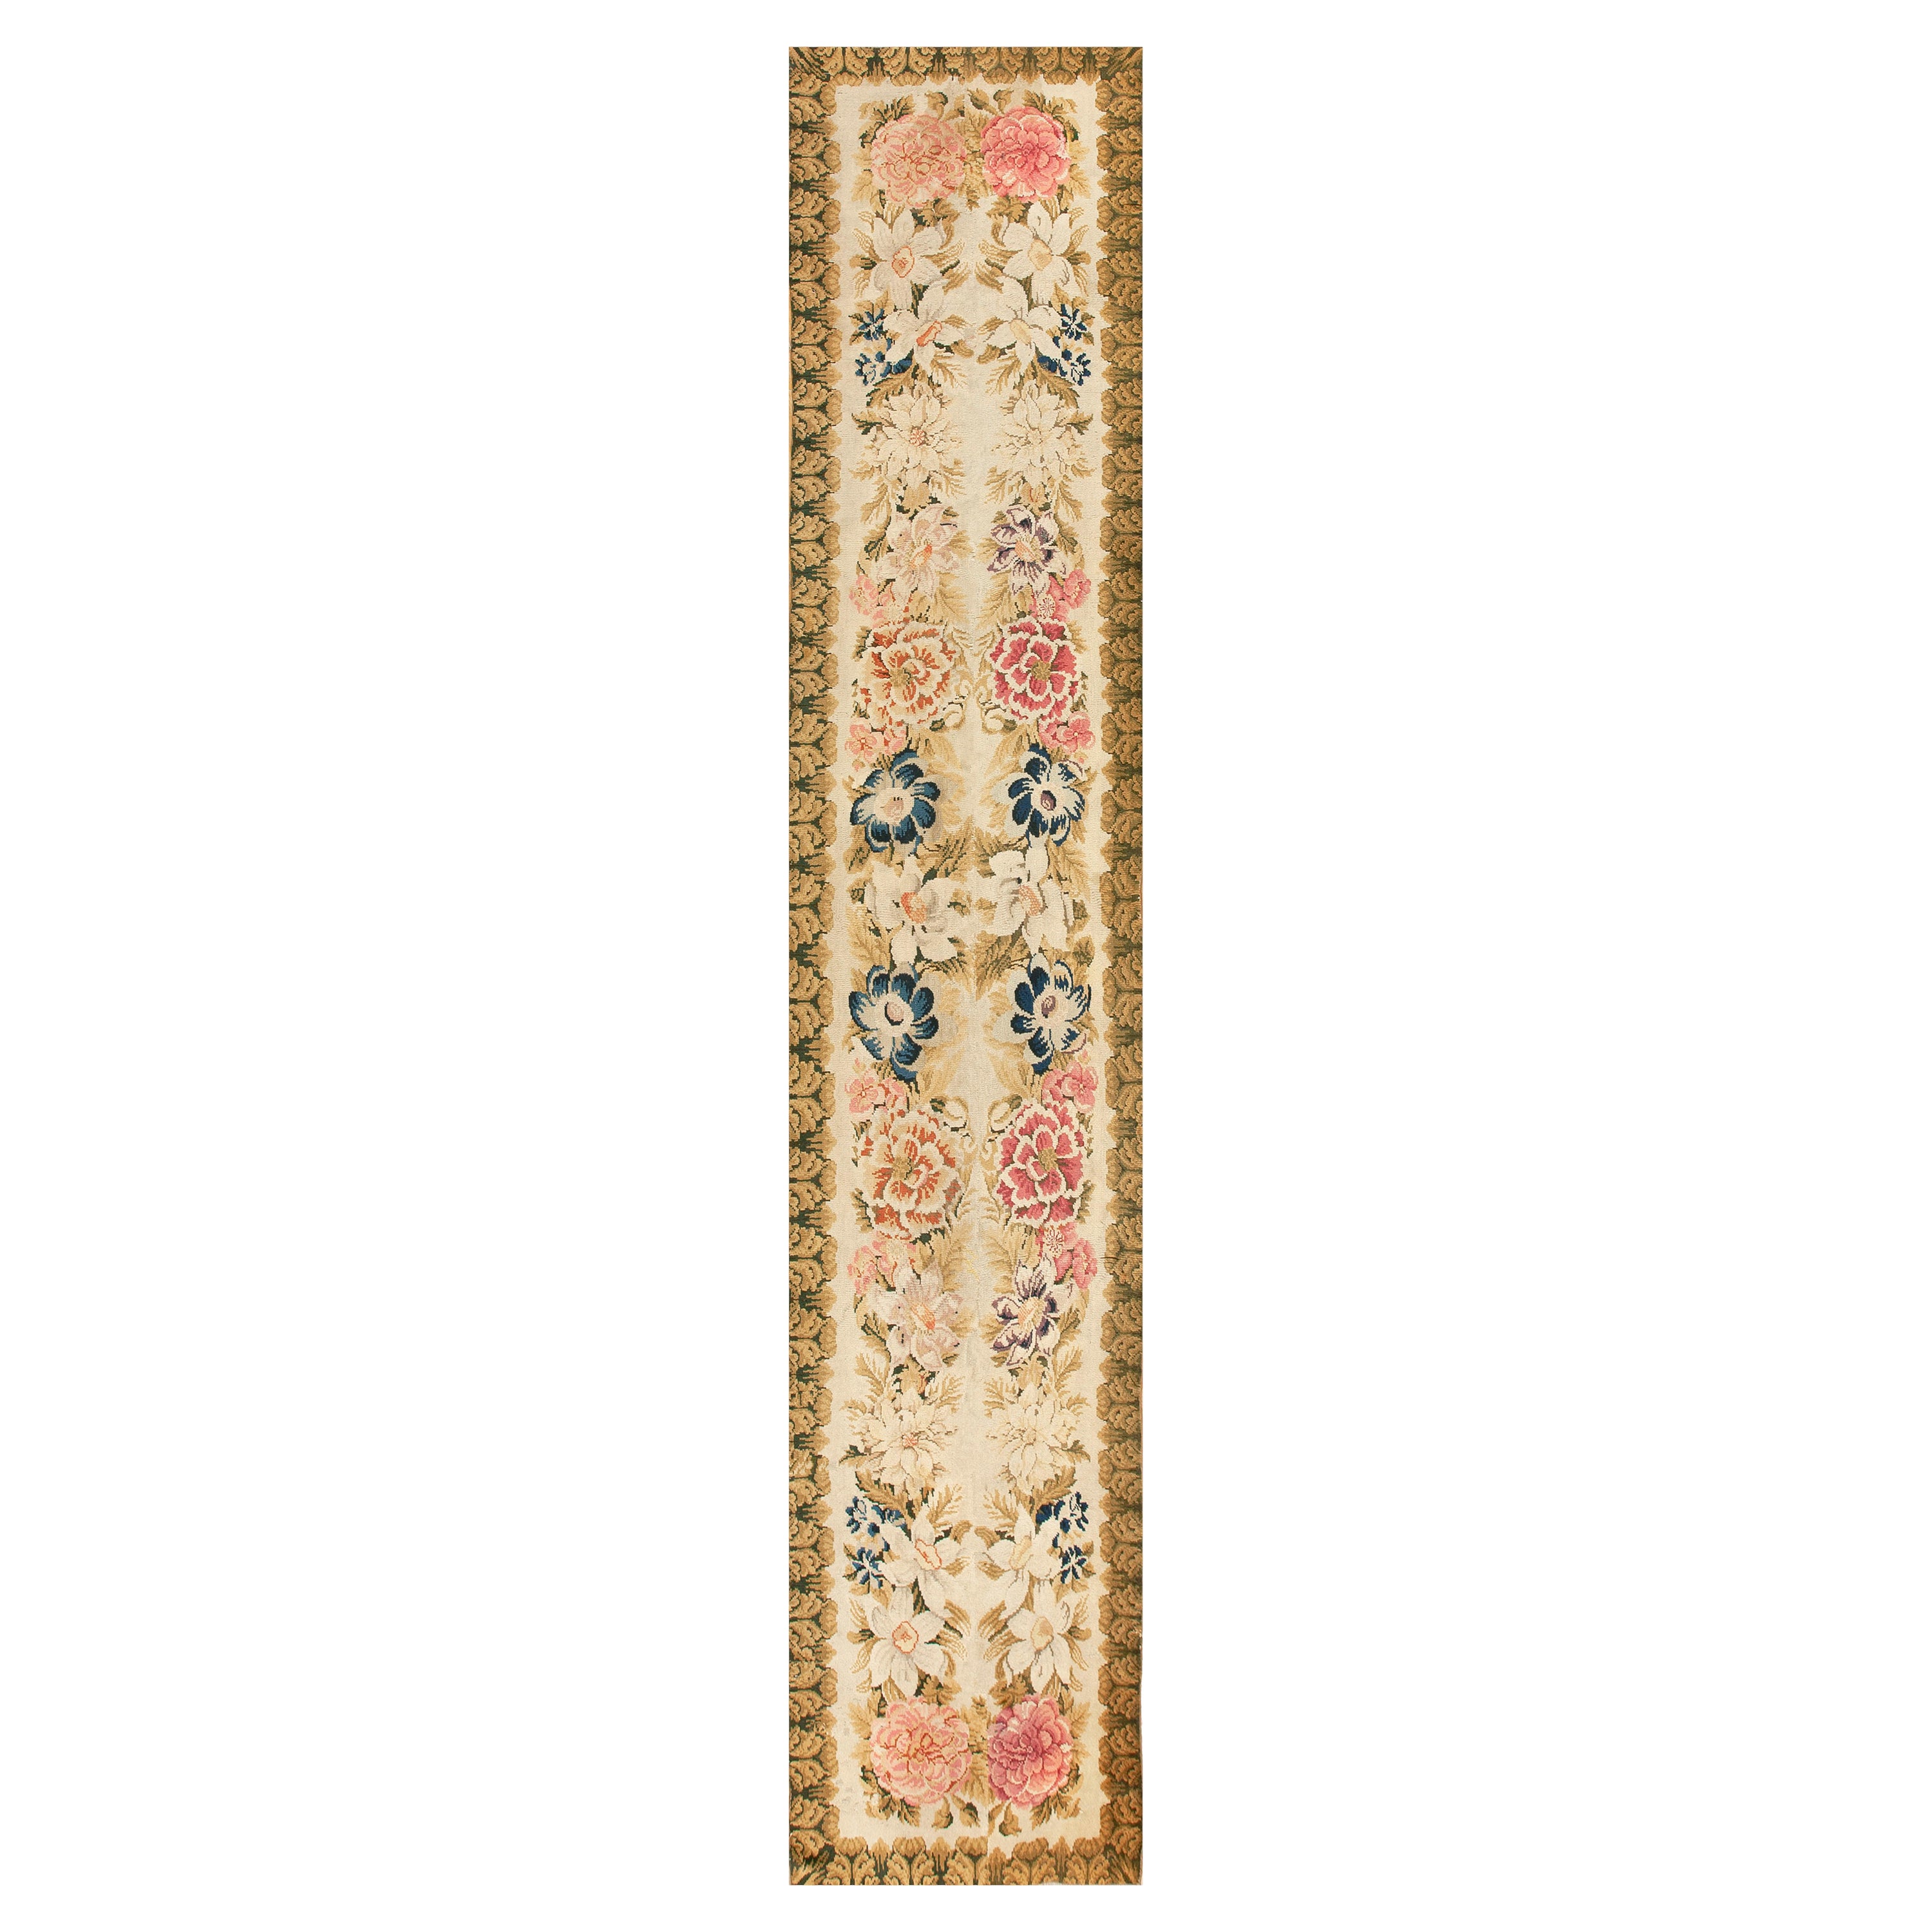 Mid 18th Century English Axminster Carpet ( 3'4" x 17'4" - 102 x 528 cm ) For Sale